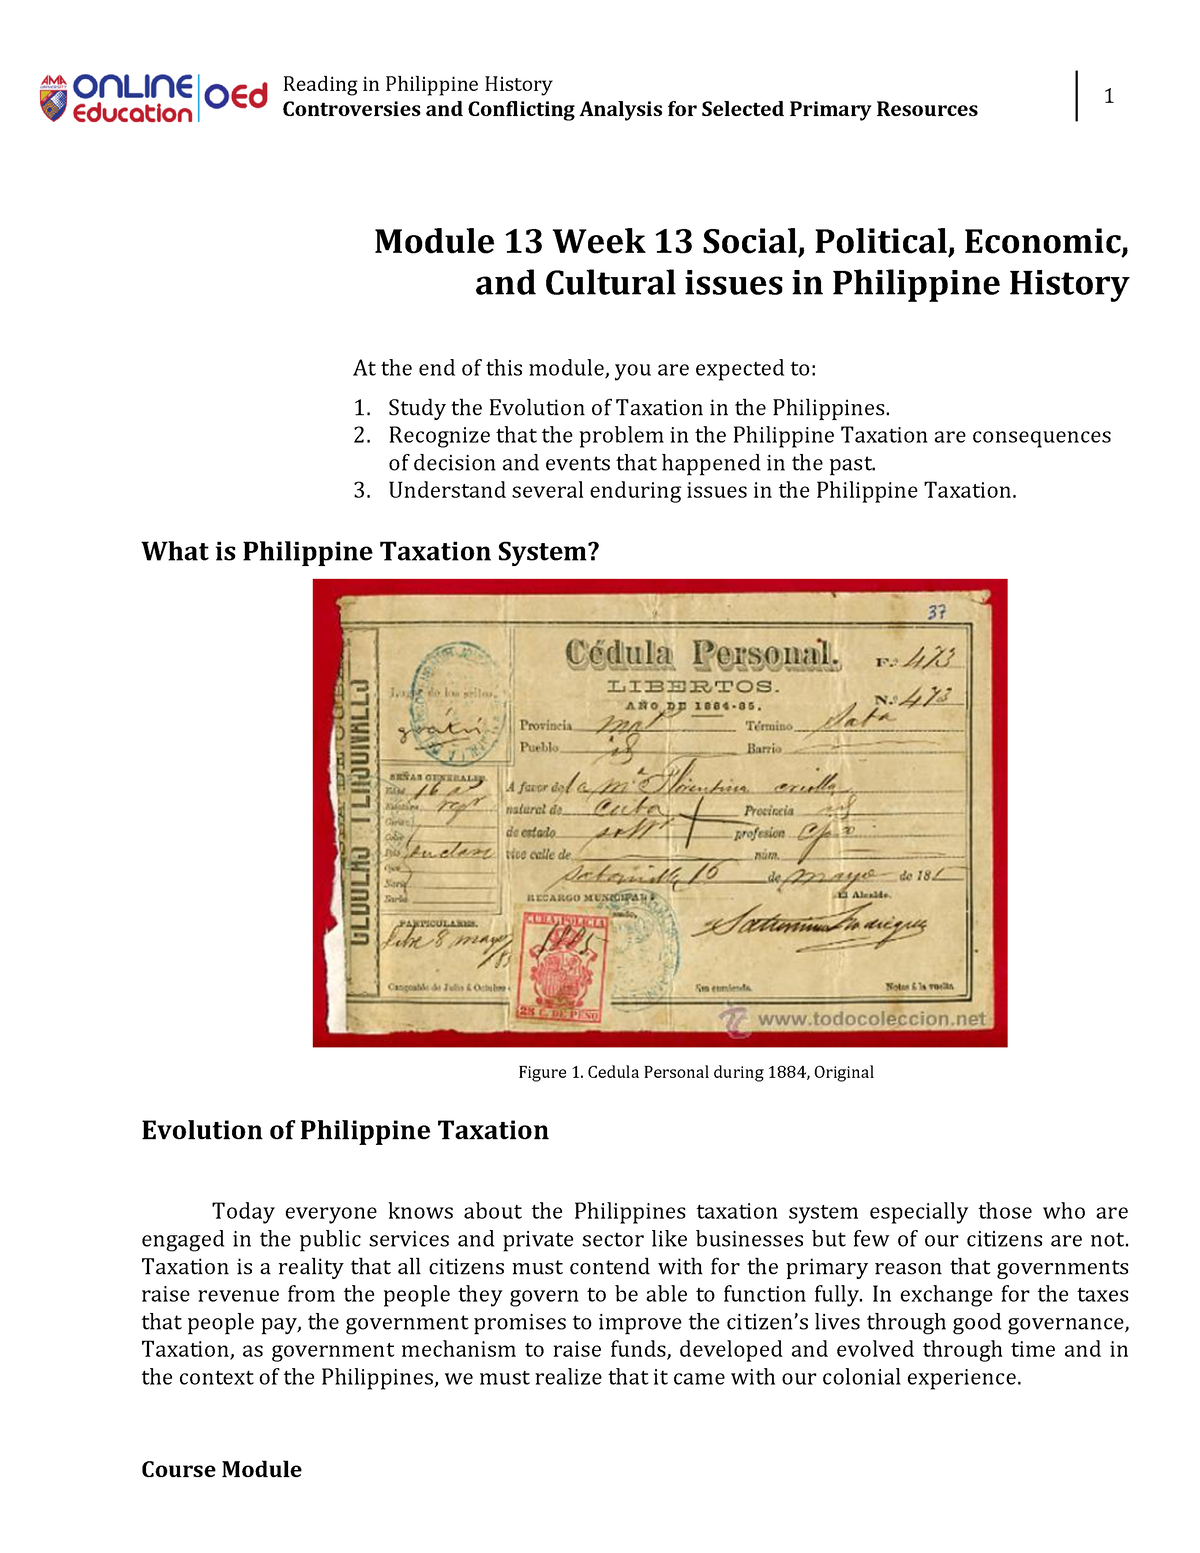 social studies research topics in the philippines